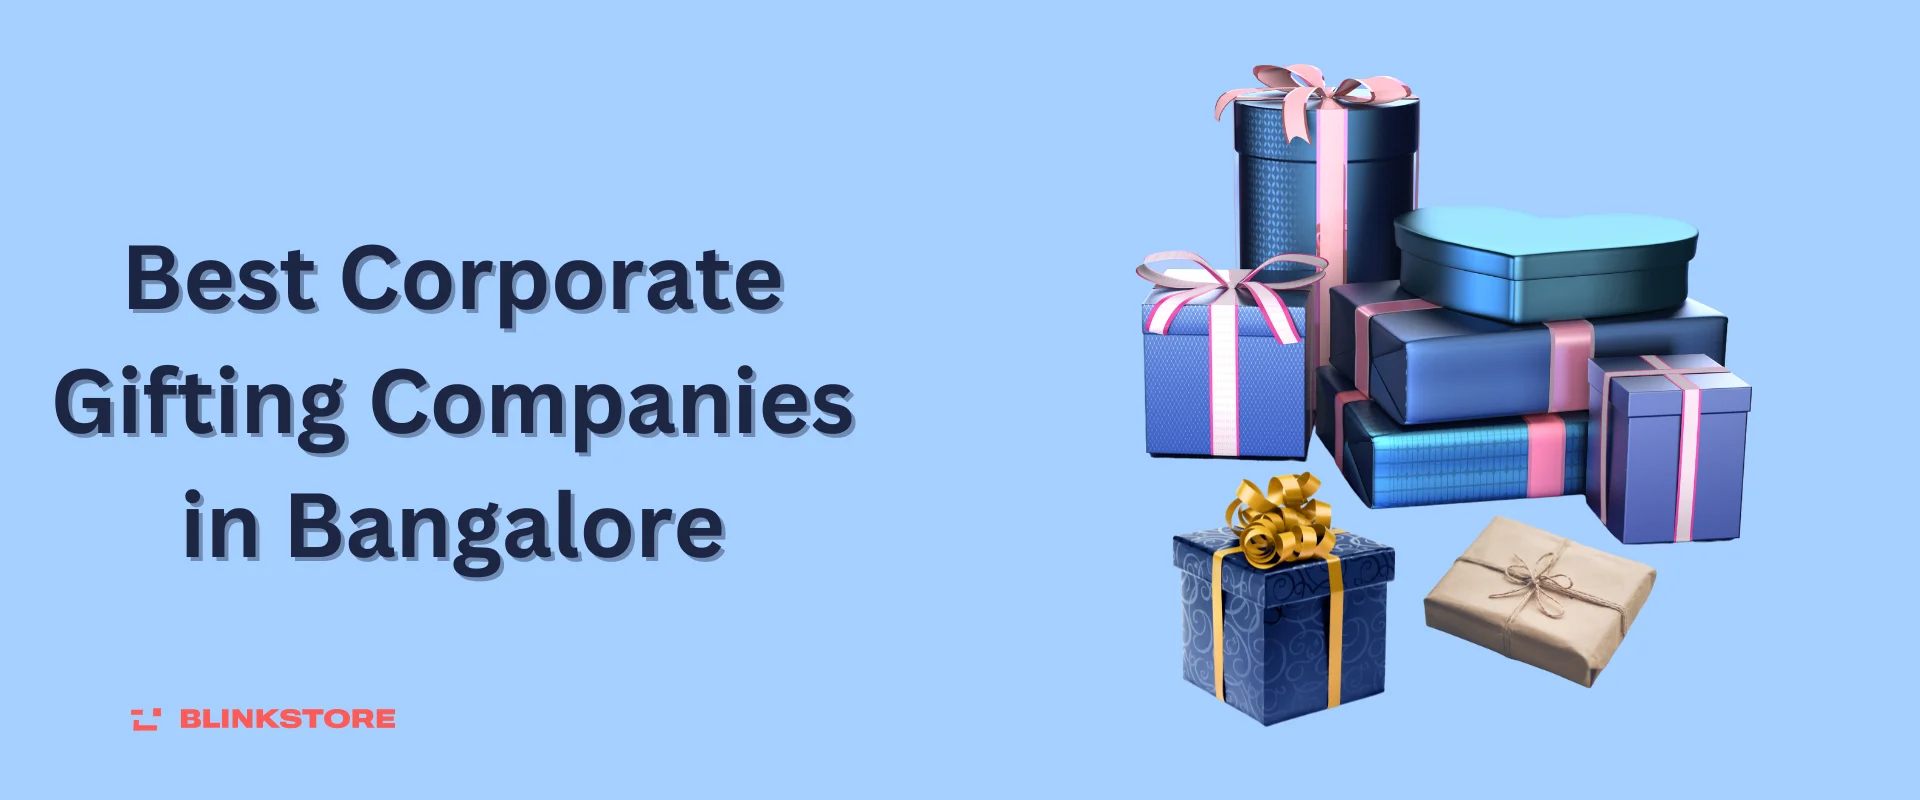 Best Corporate Gifting Companies in Bangalore